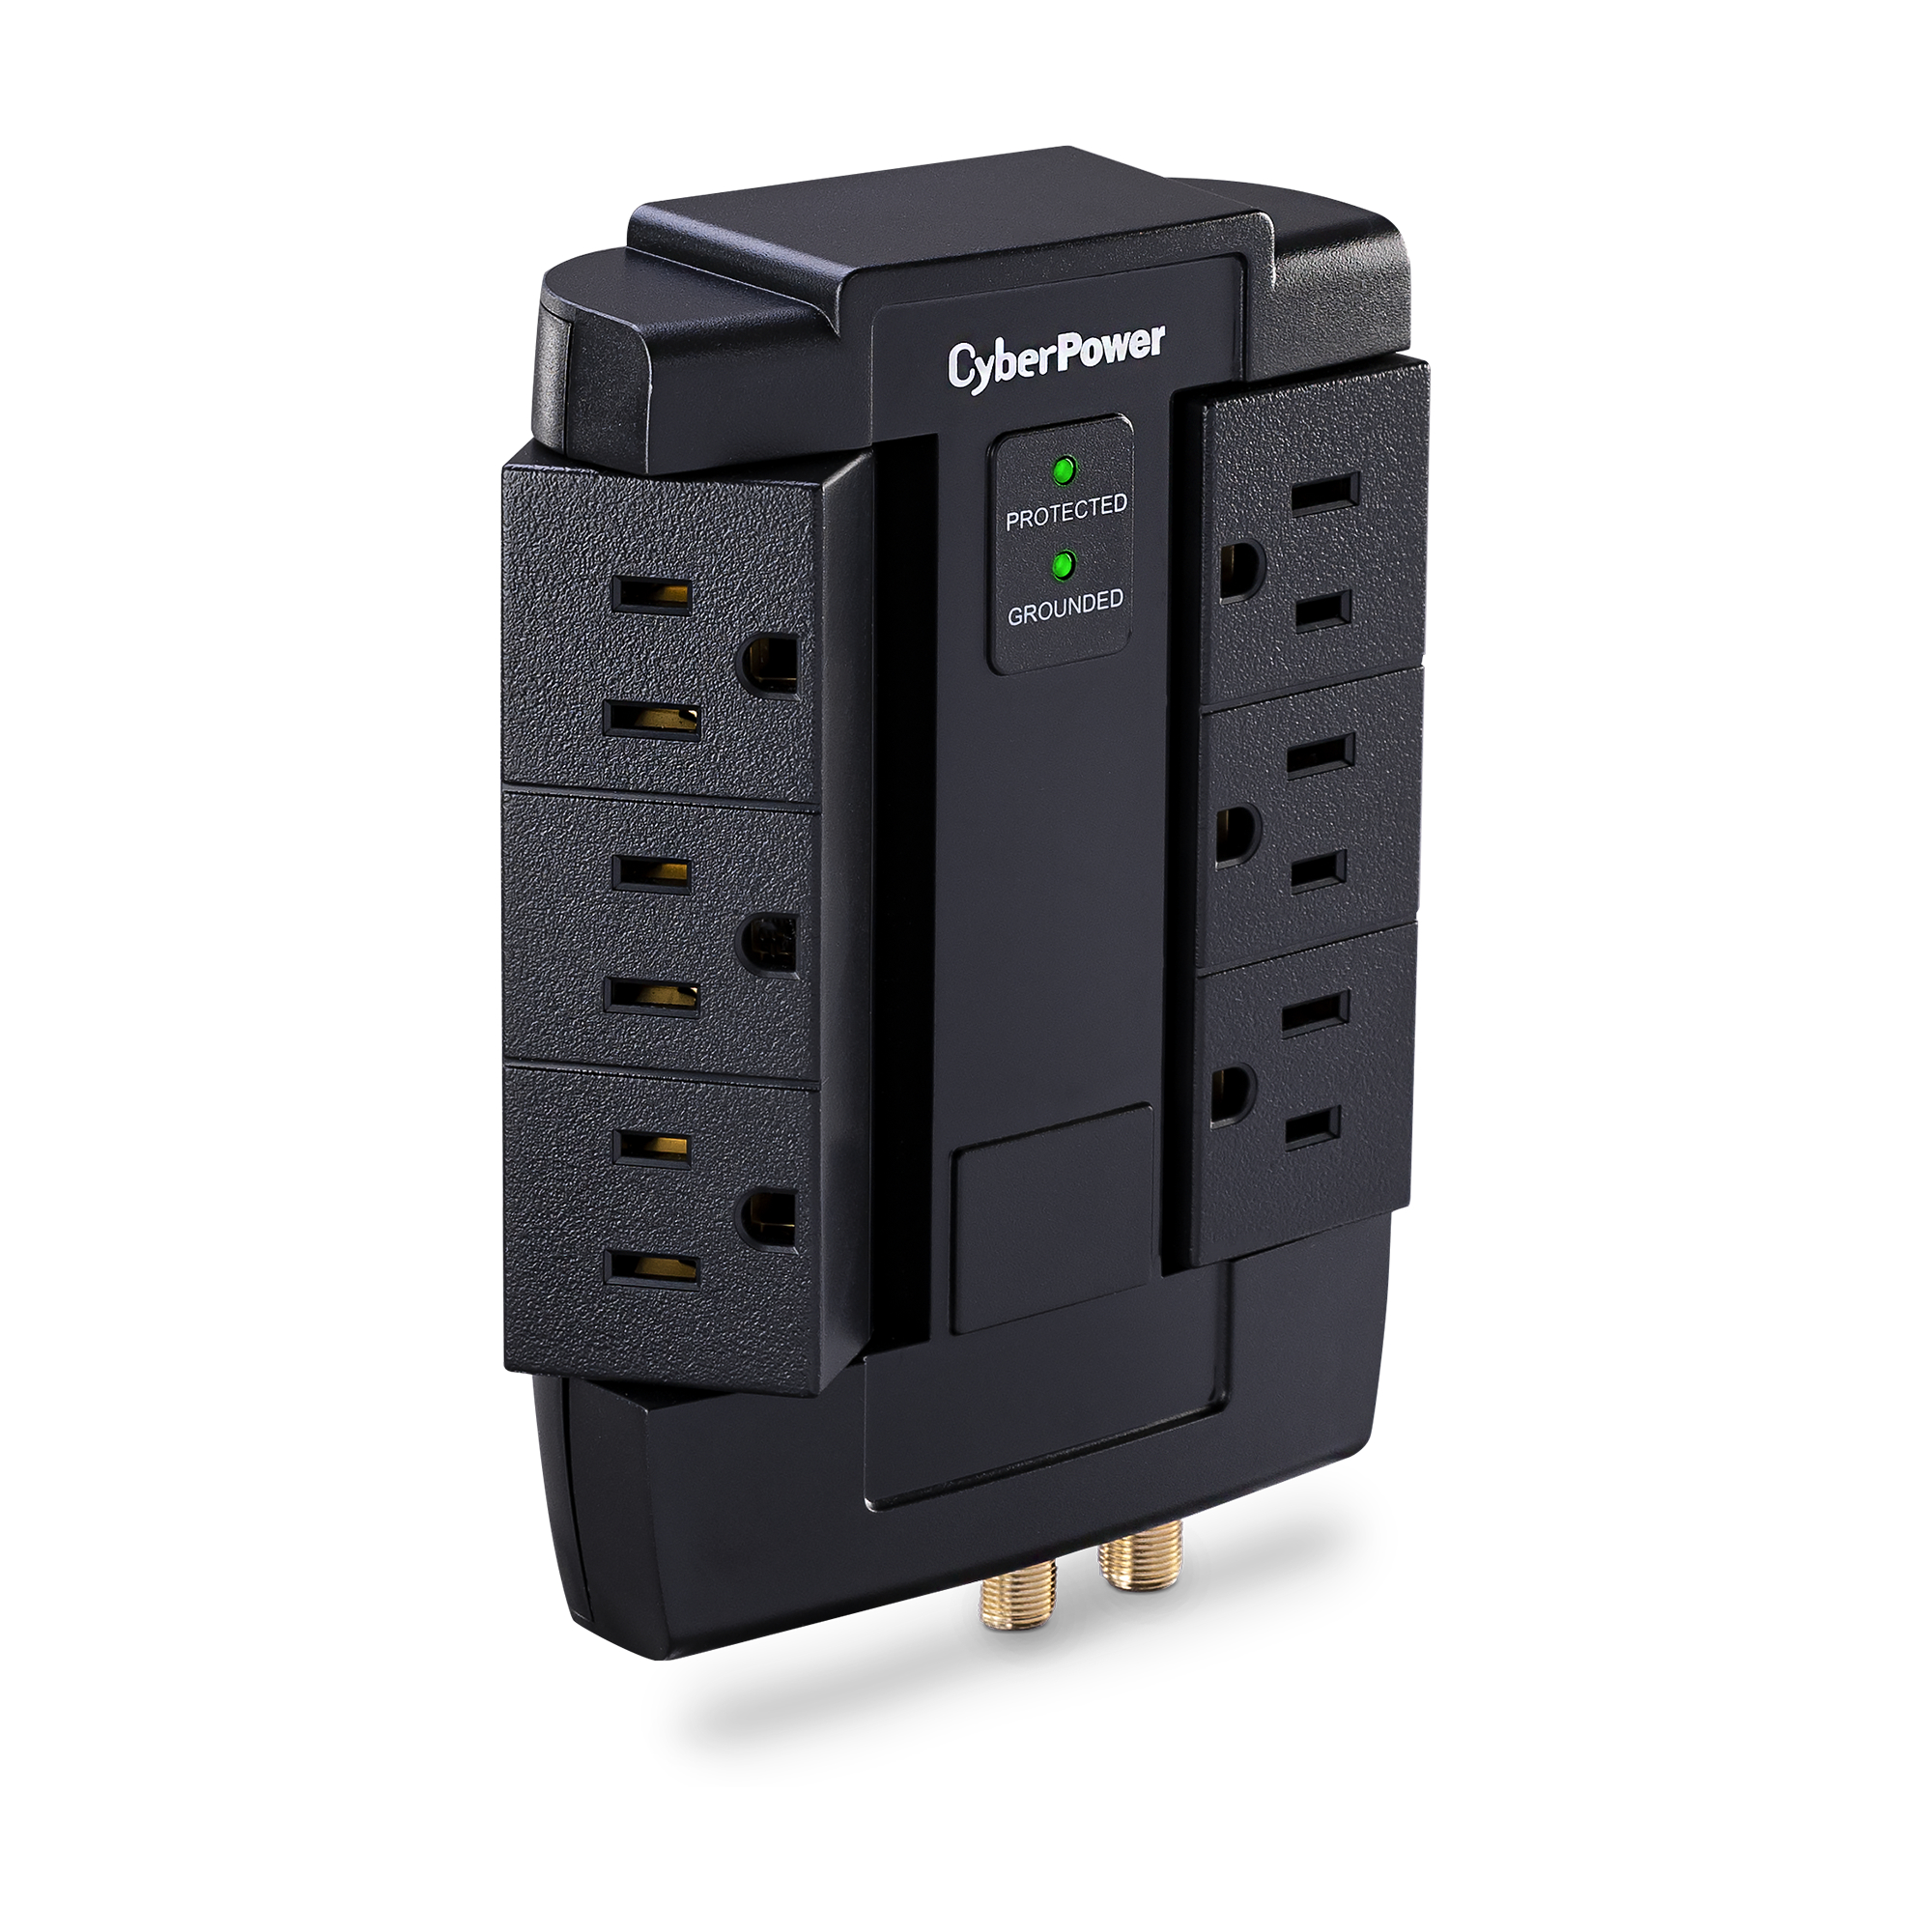 CyberPower CyberPower HT600TCWS home theater surge protector 1200 joules 